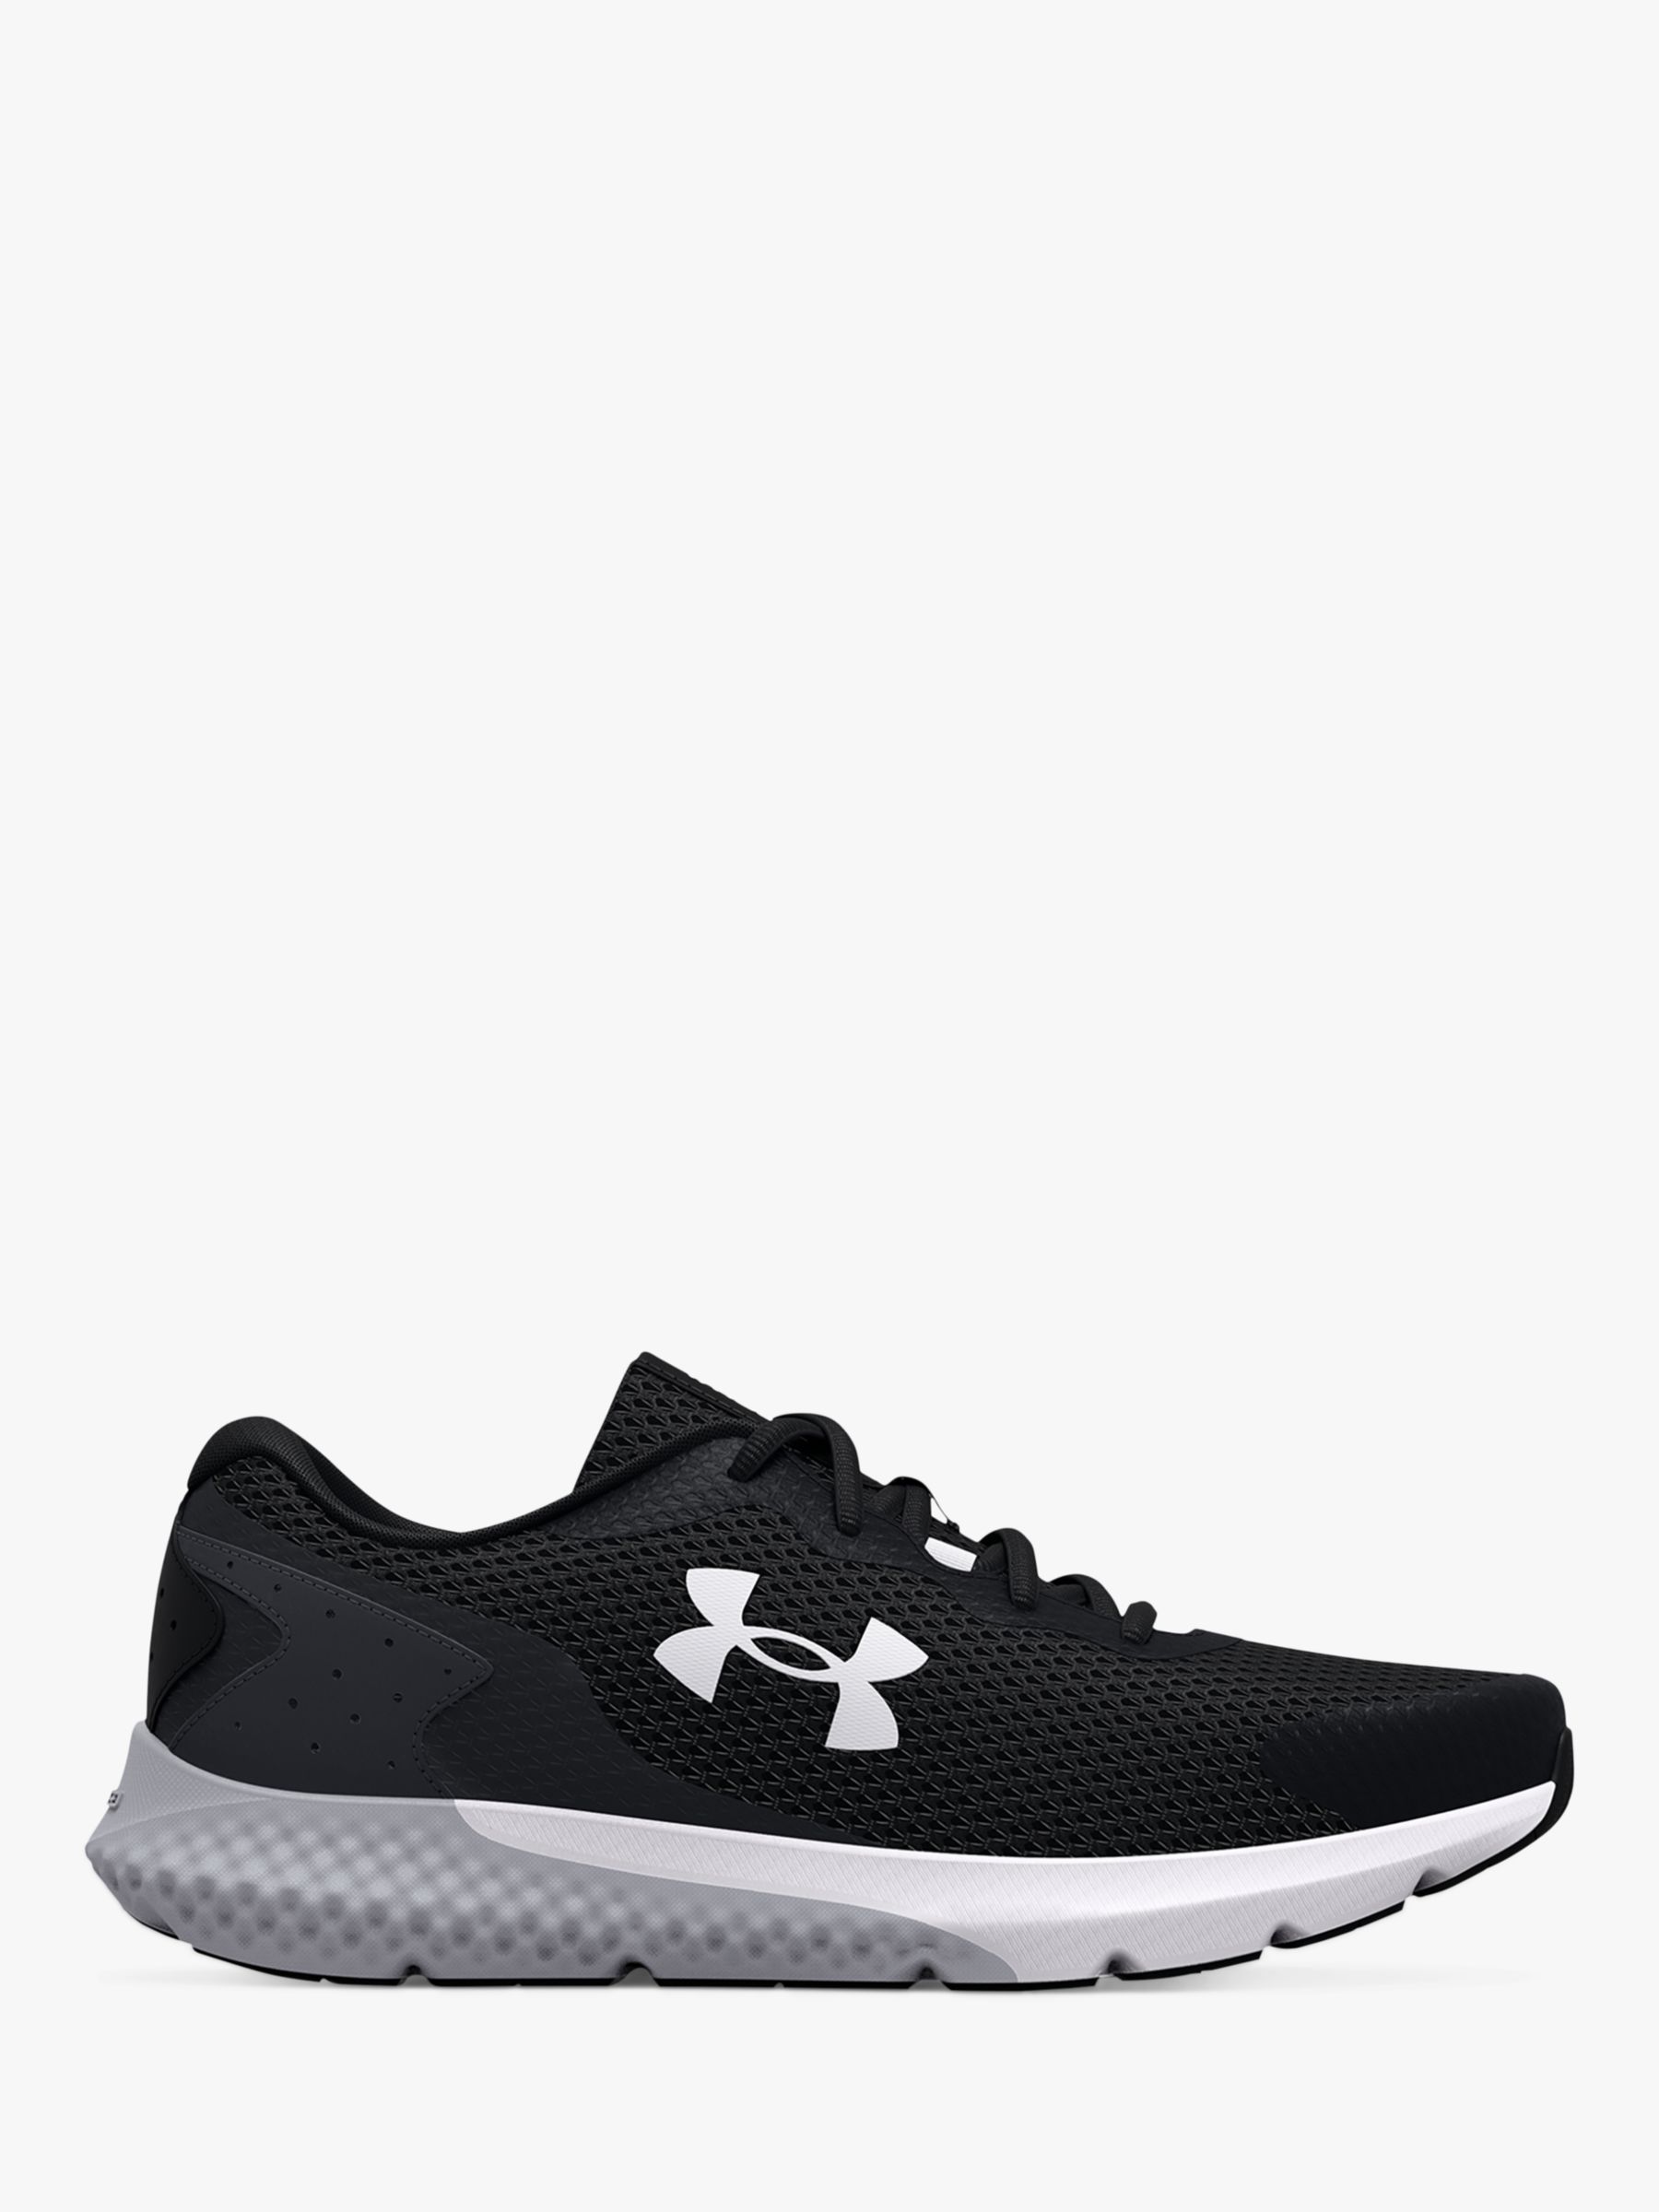 Mens Black & White Under Armour Charged Rogue 3 Trainers